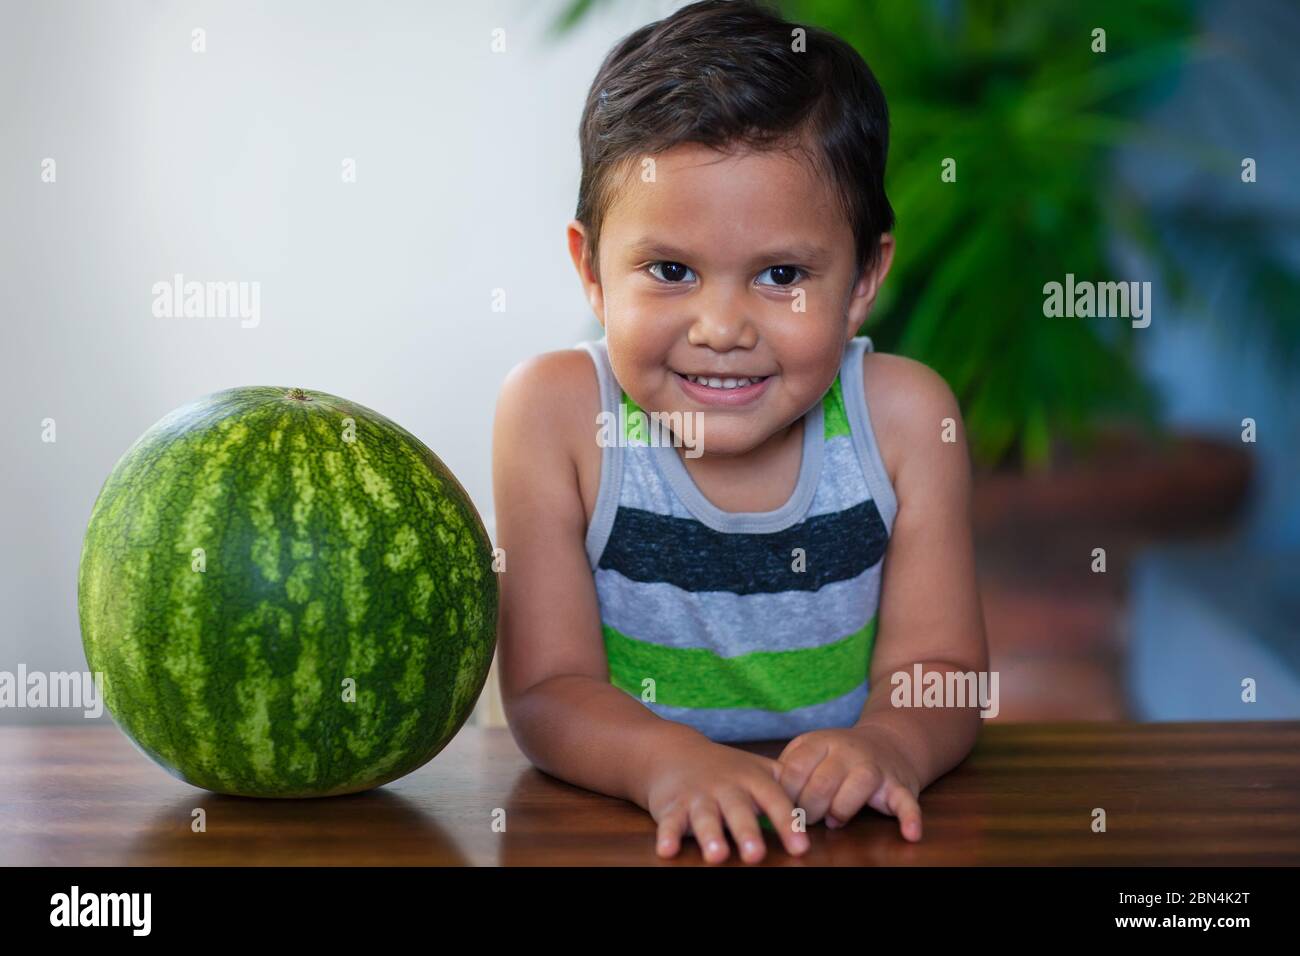 A cute young boy sitting next to a ripe watermelon he will be eating as part of a low-calorie and nutritious treat. Stock Photo